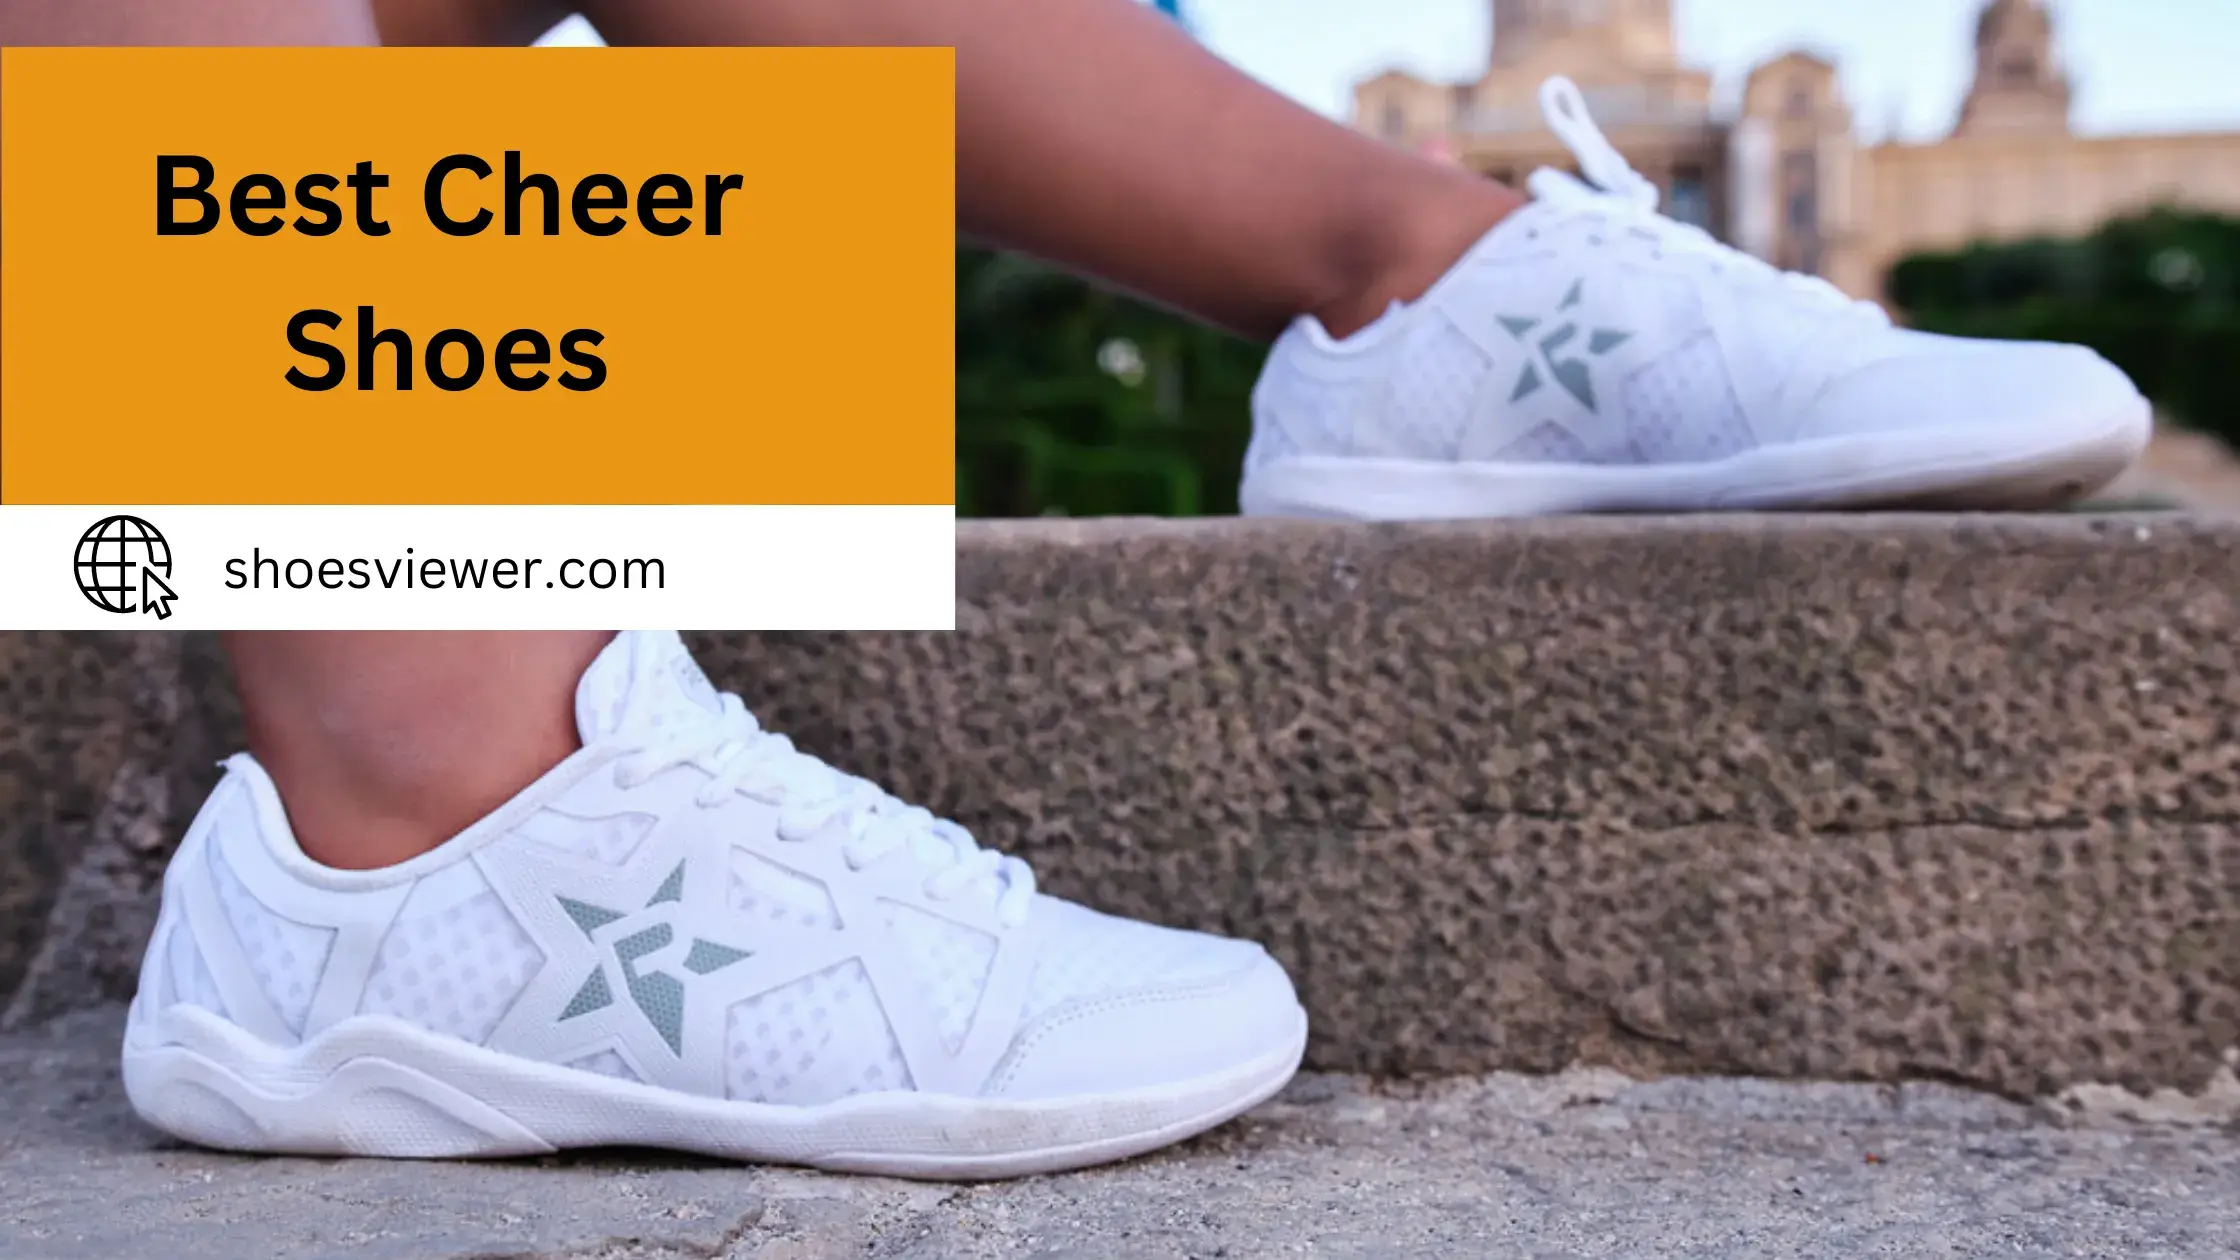 Best Cheer Shoes - A Comprehensive Guide